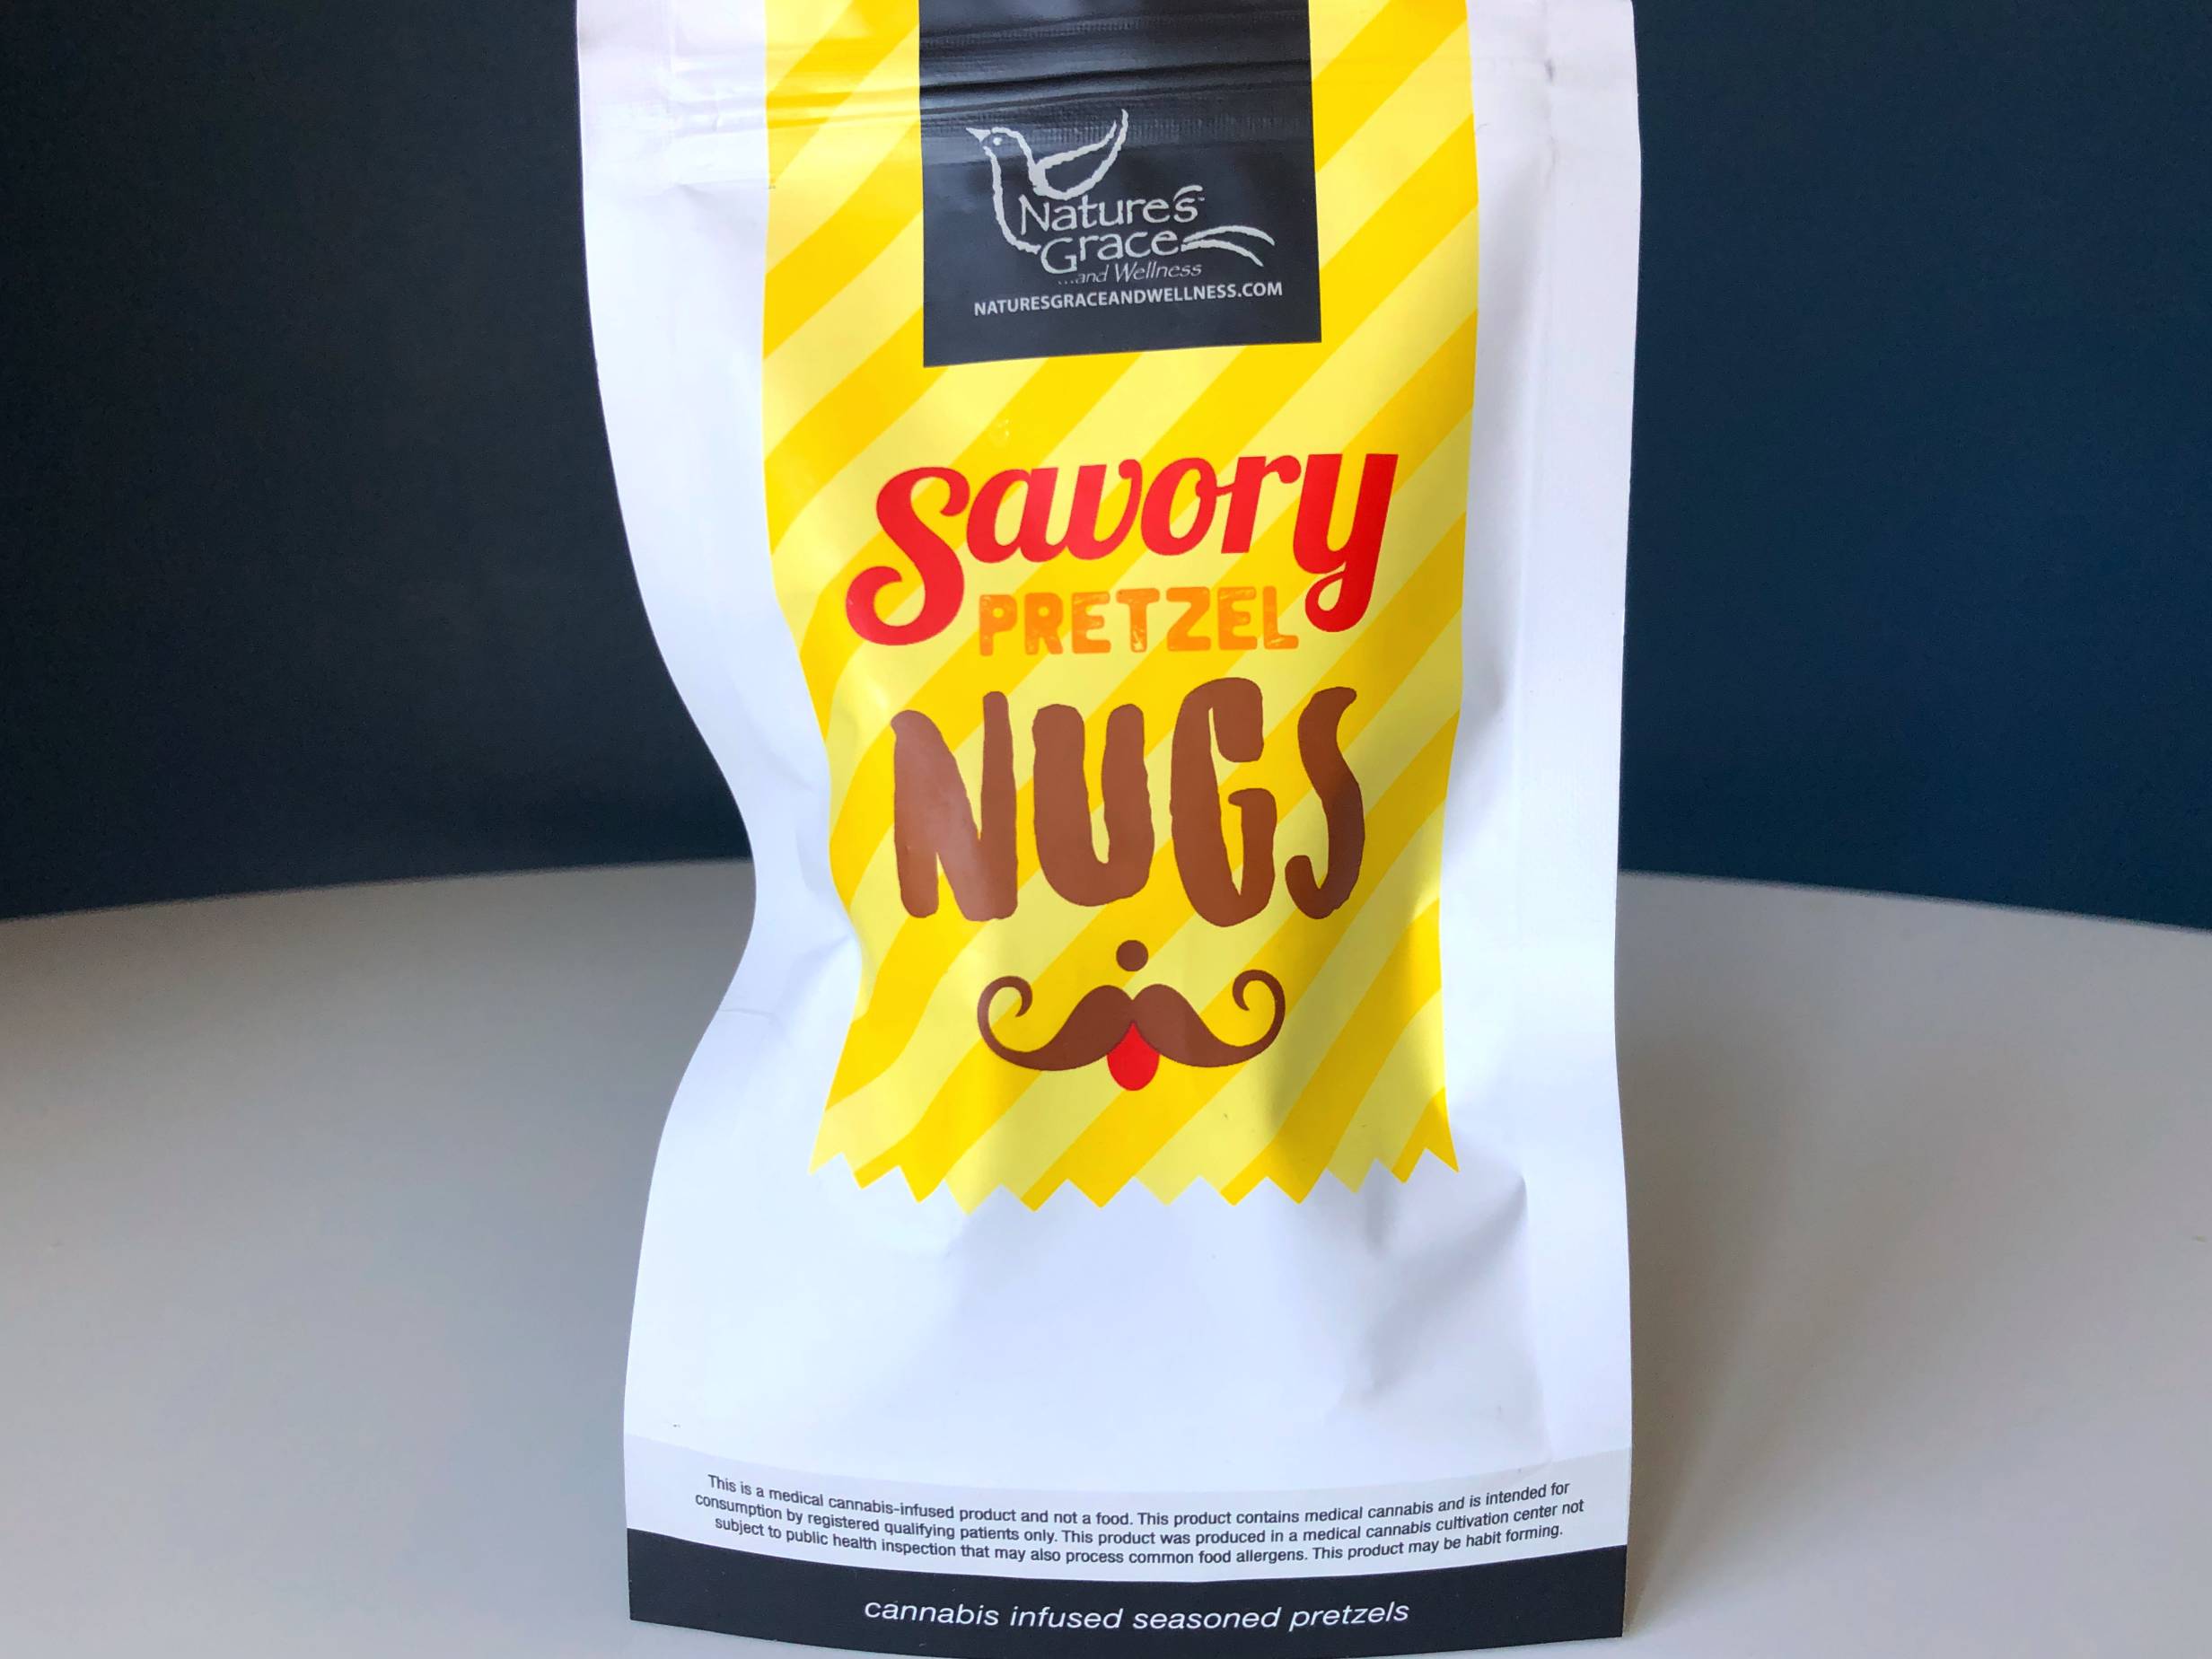 A top-zip bag of Nature's Grace Savory Pretzel Nugs sits on a white table with a blue background. Photo by Alyssa Buckley.